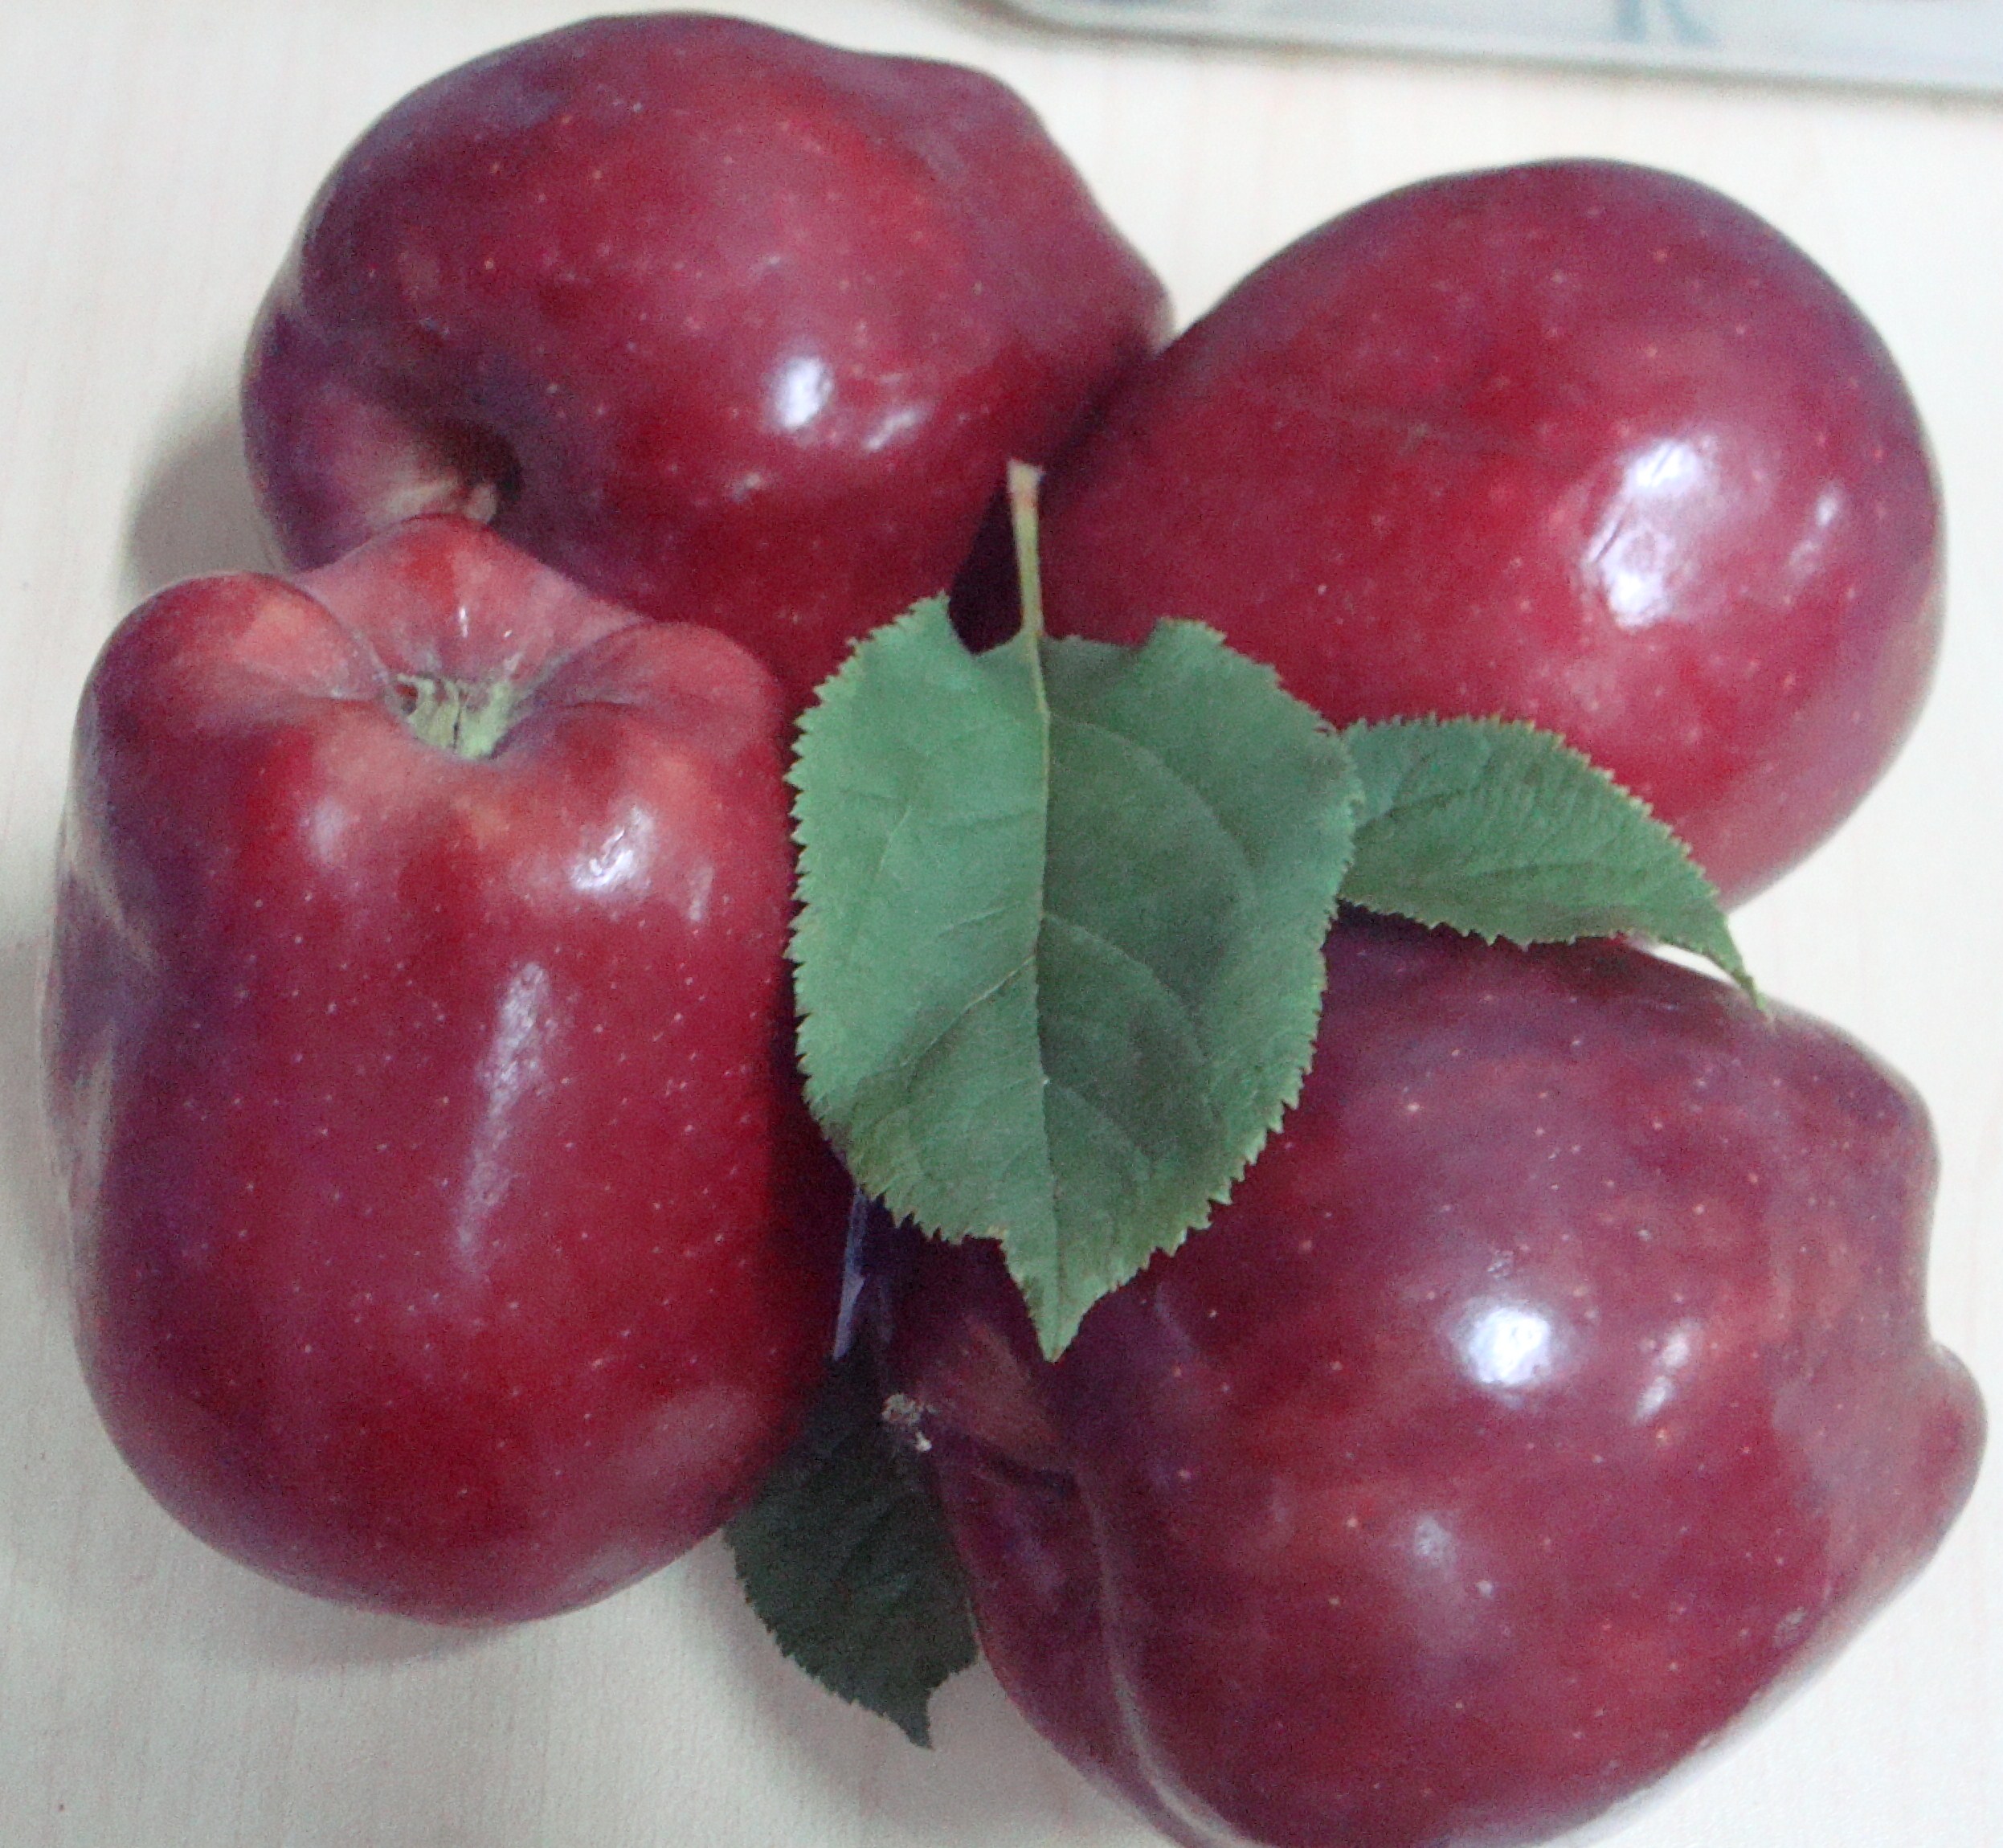 Grow An Apple Tree From Seed In Singapore?